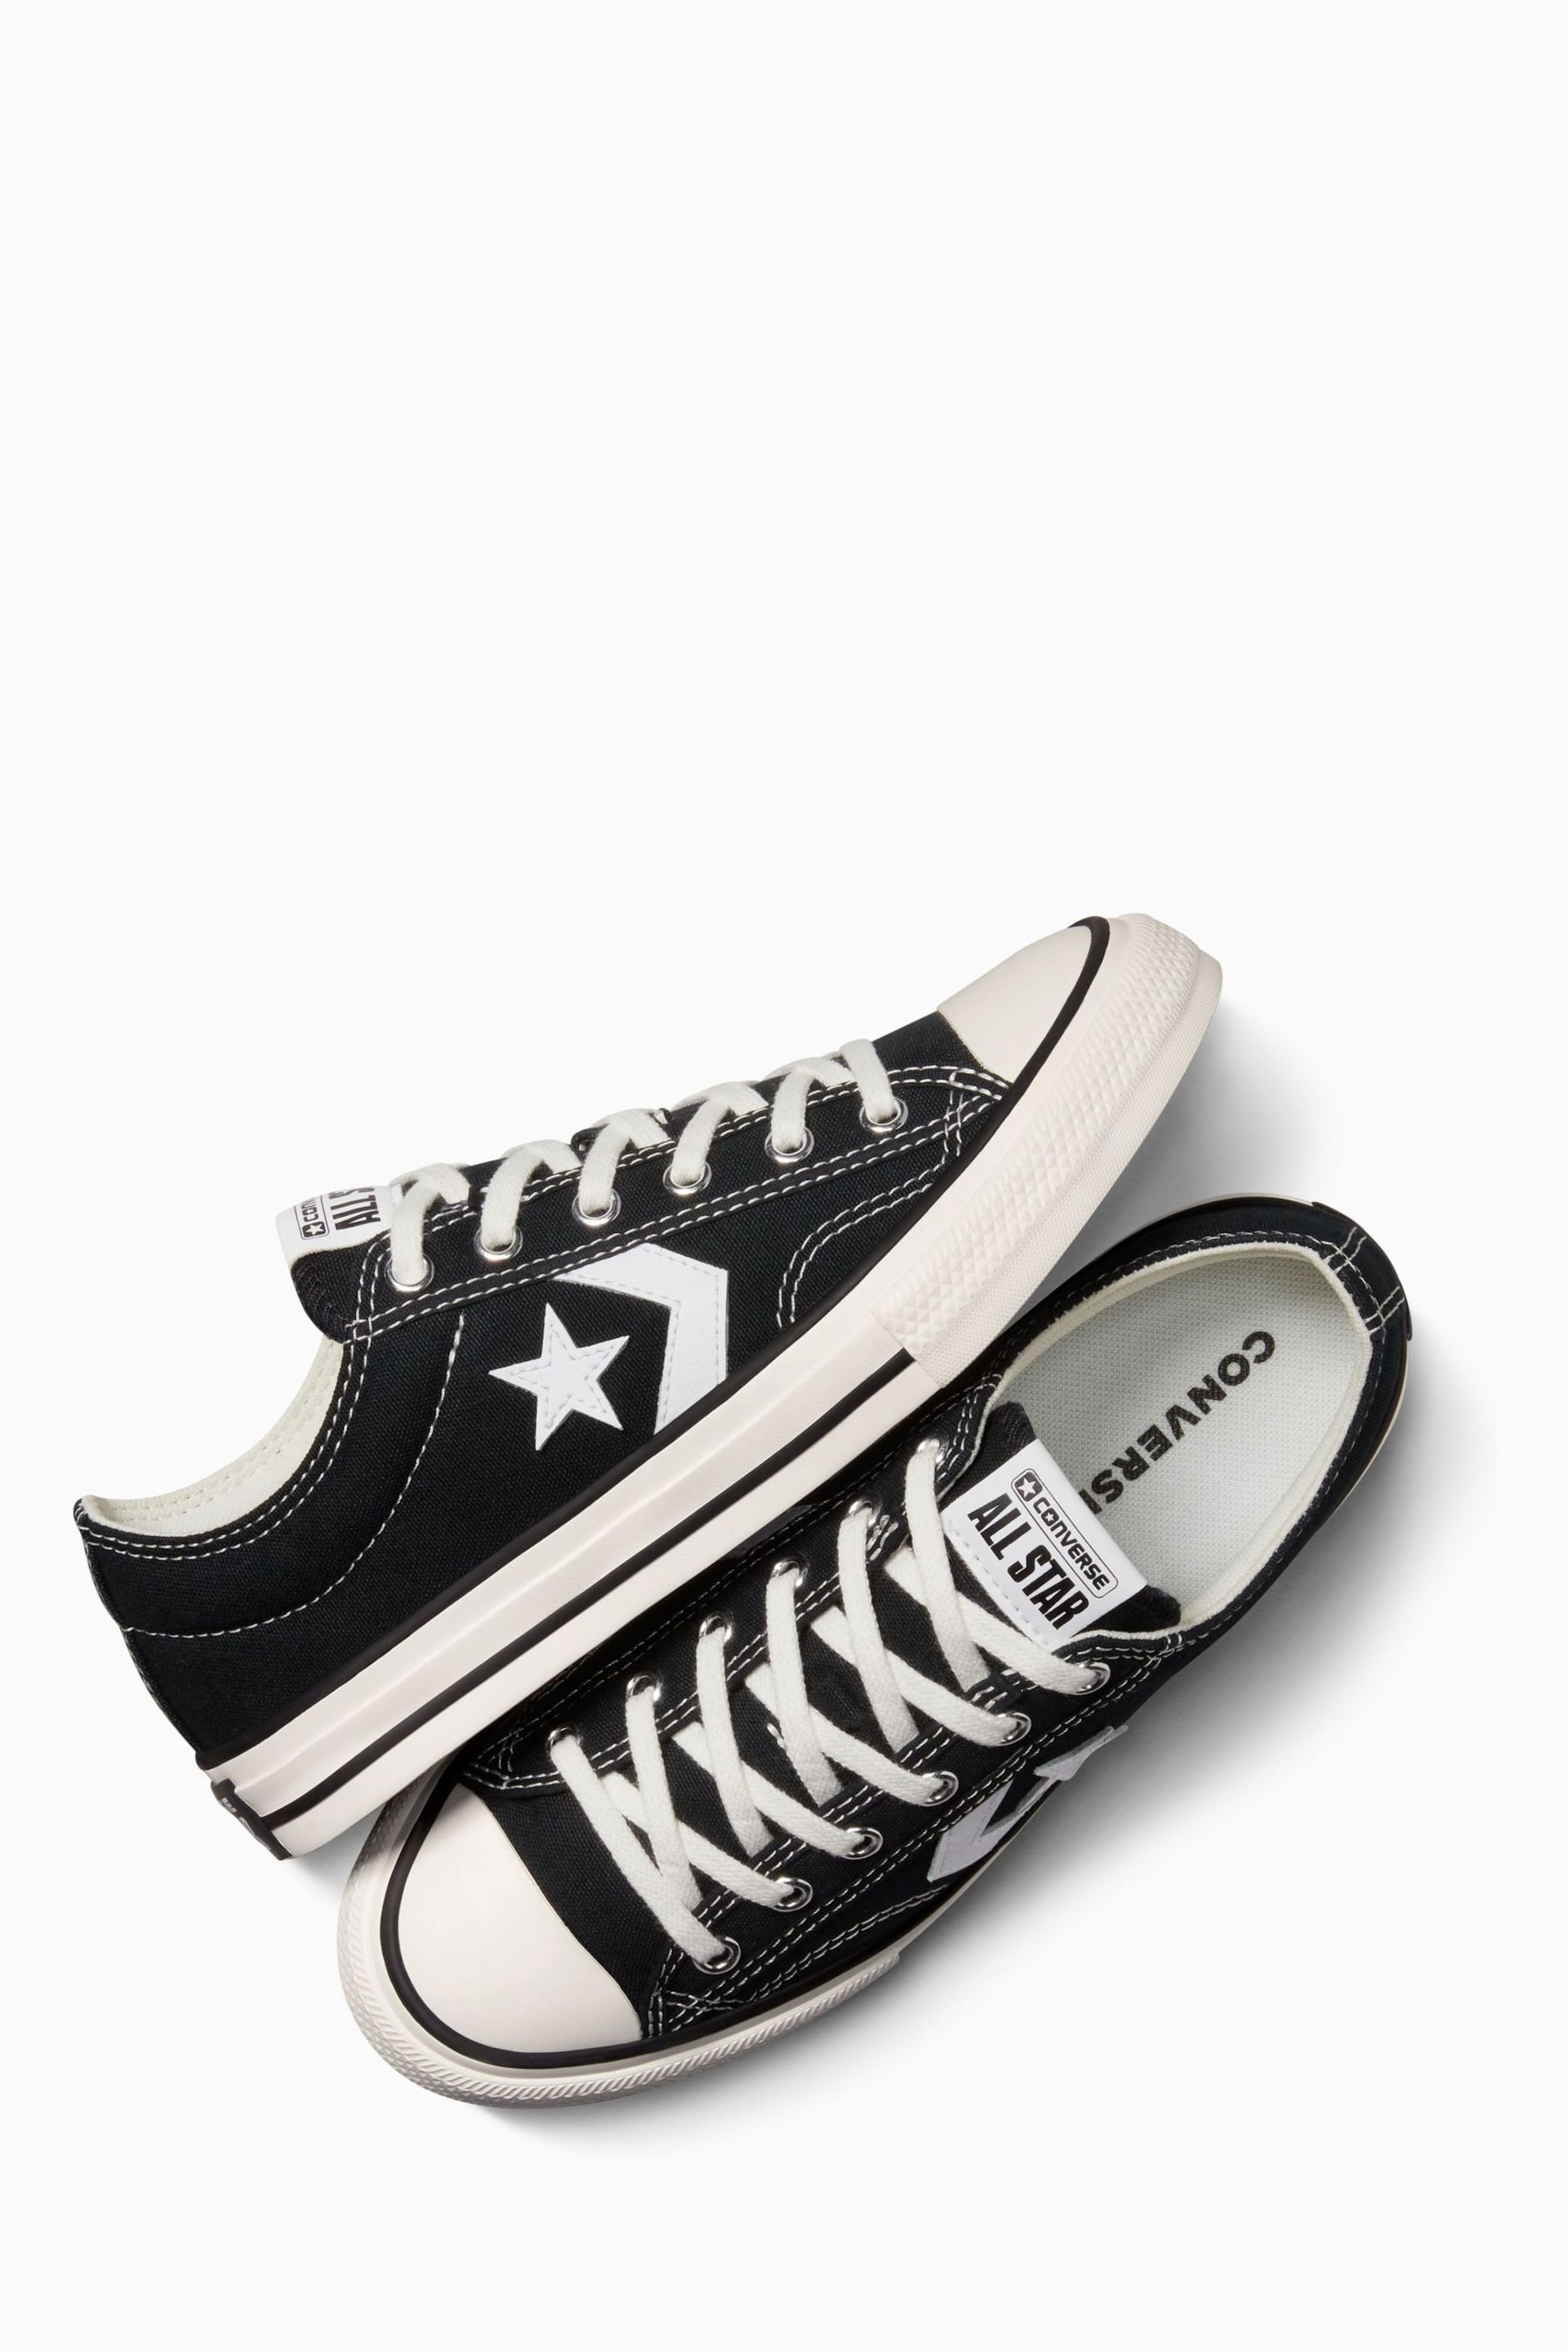 Converse Black Youth Star Player 76 Trainers - Image 5 of 8